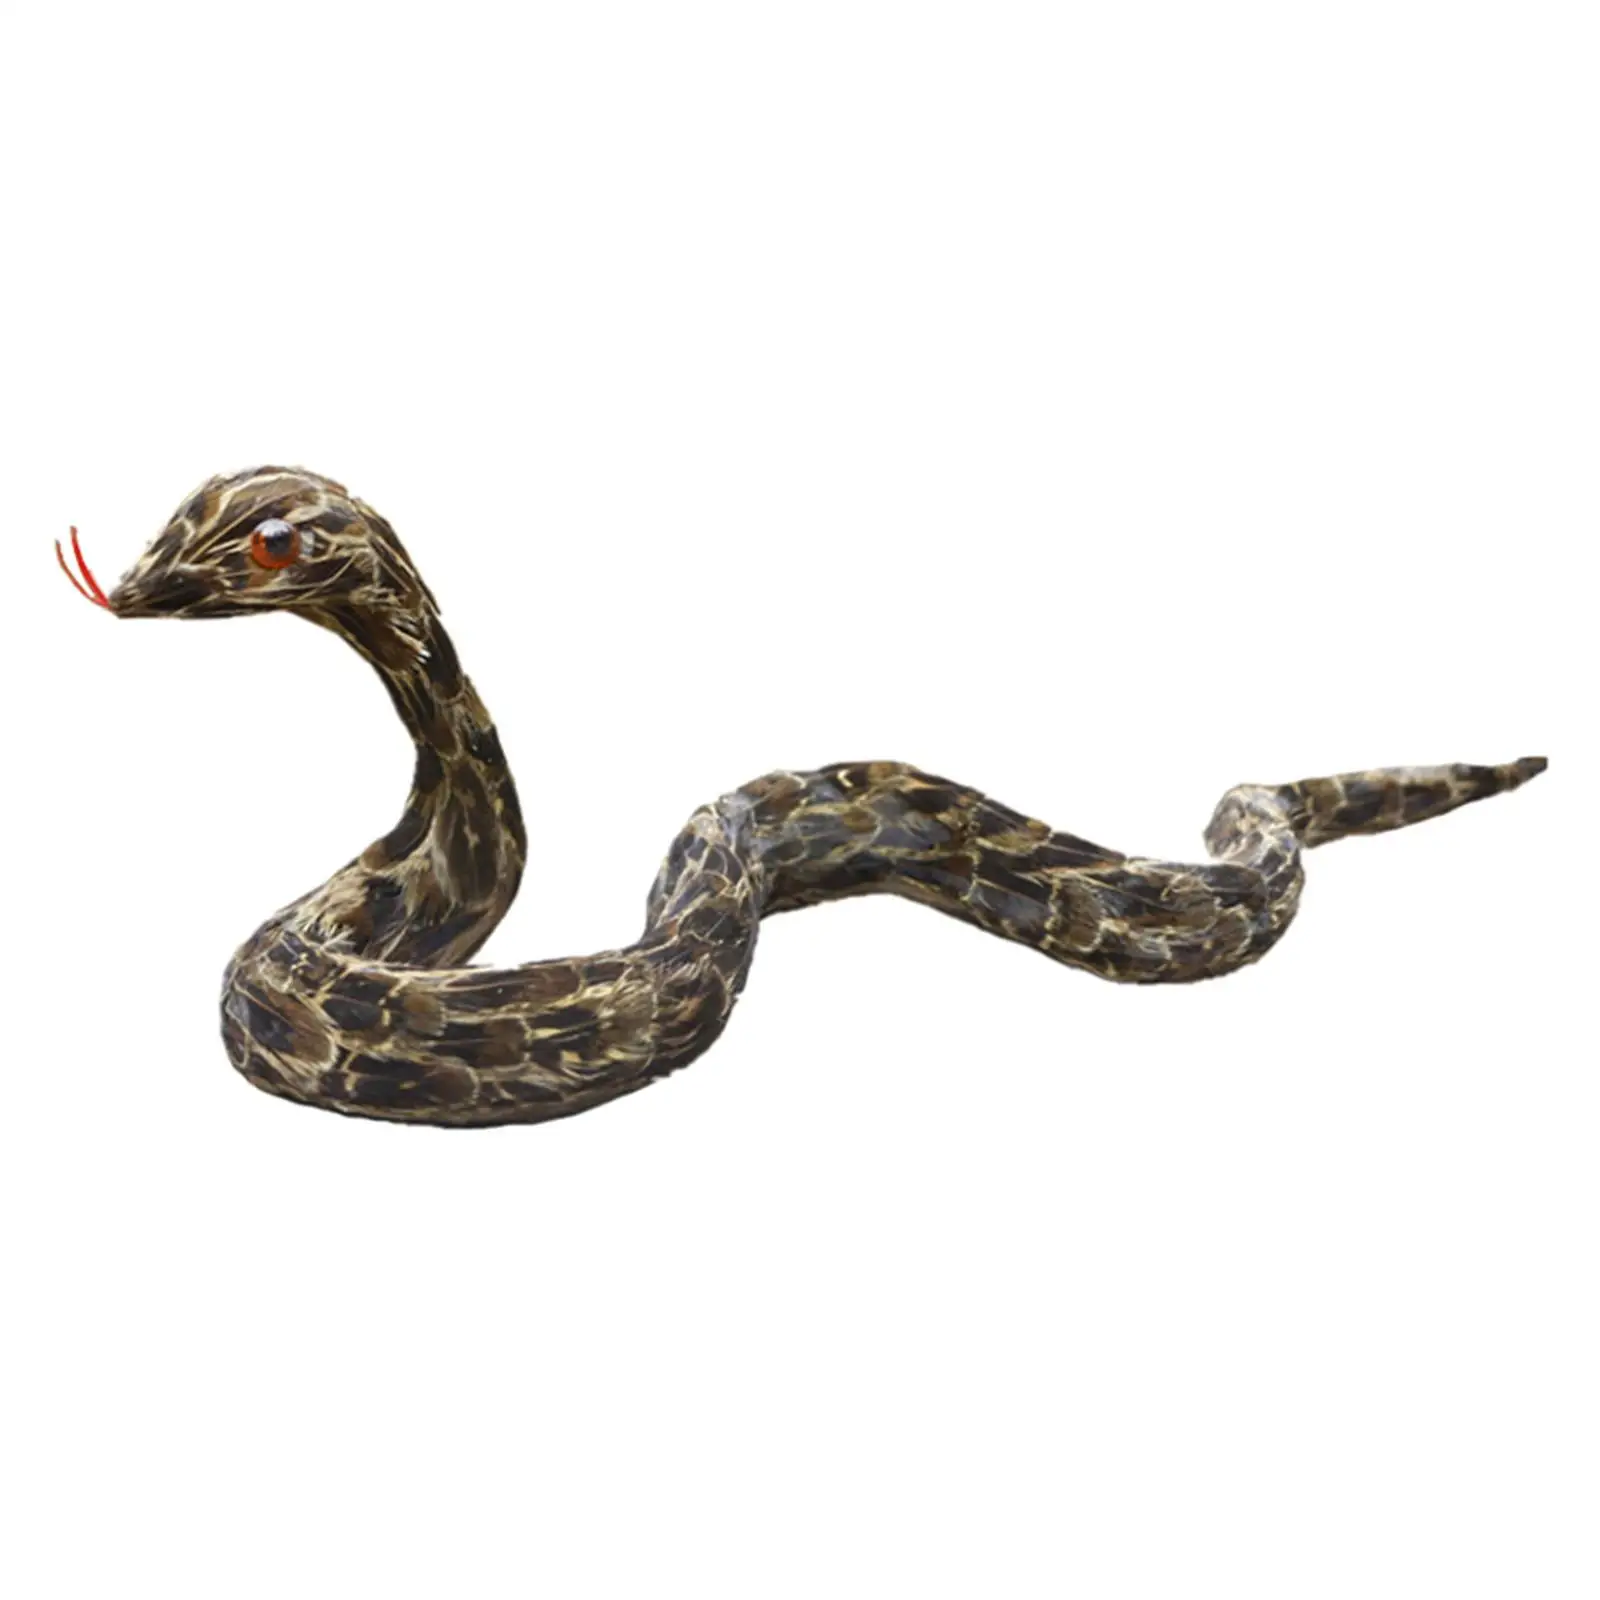 High Simulation Snake Model Toy Party Scary Creepy Snake Toy Tabletop Decors